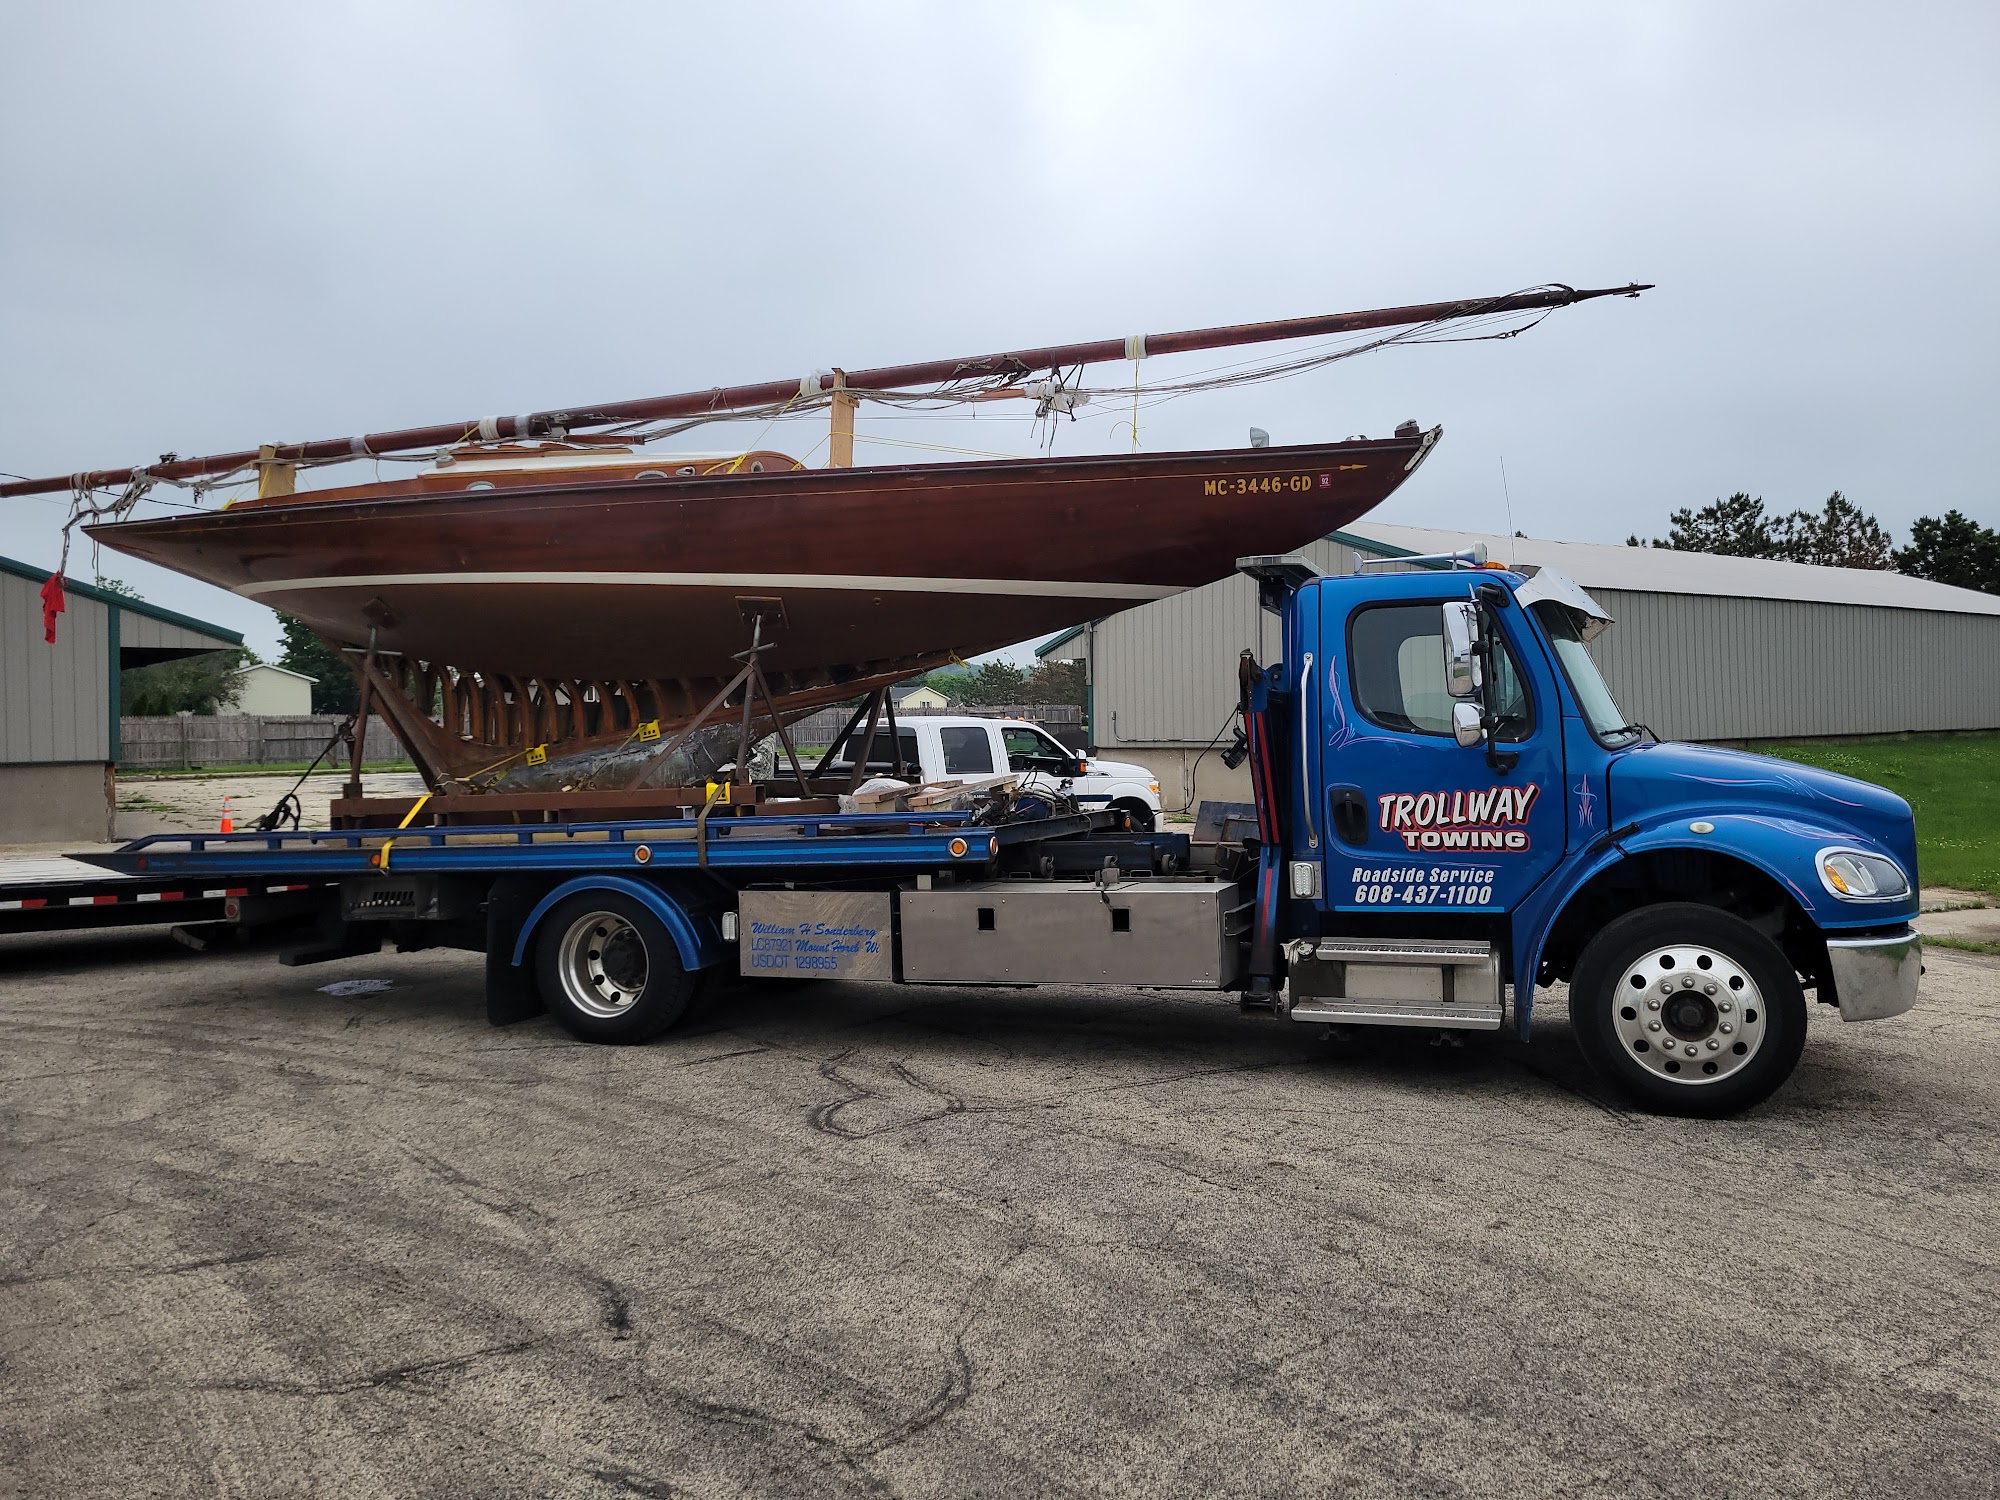 Trollway Towing LLC 918 S Blue Mounds St, Mt Horeb Wisconsin 53572